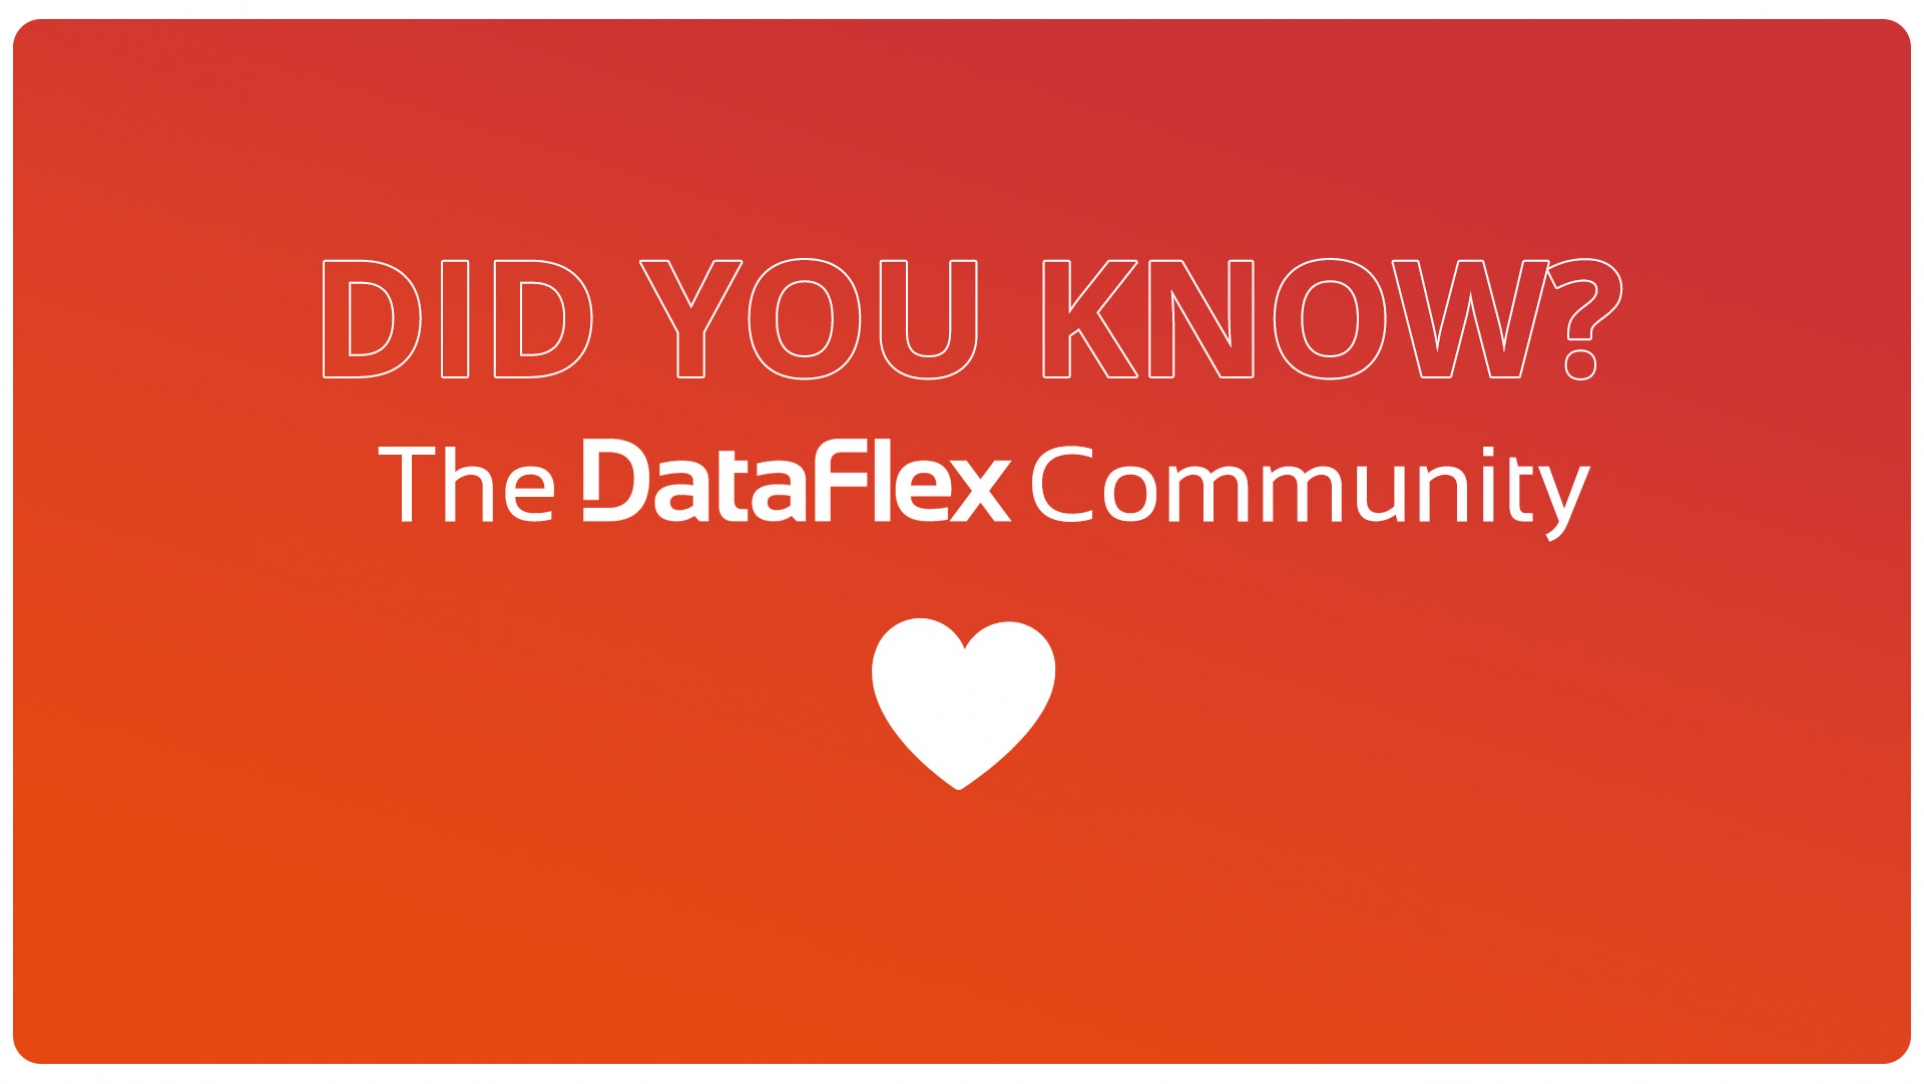 the community - did you know